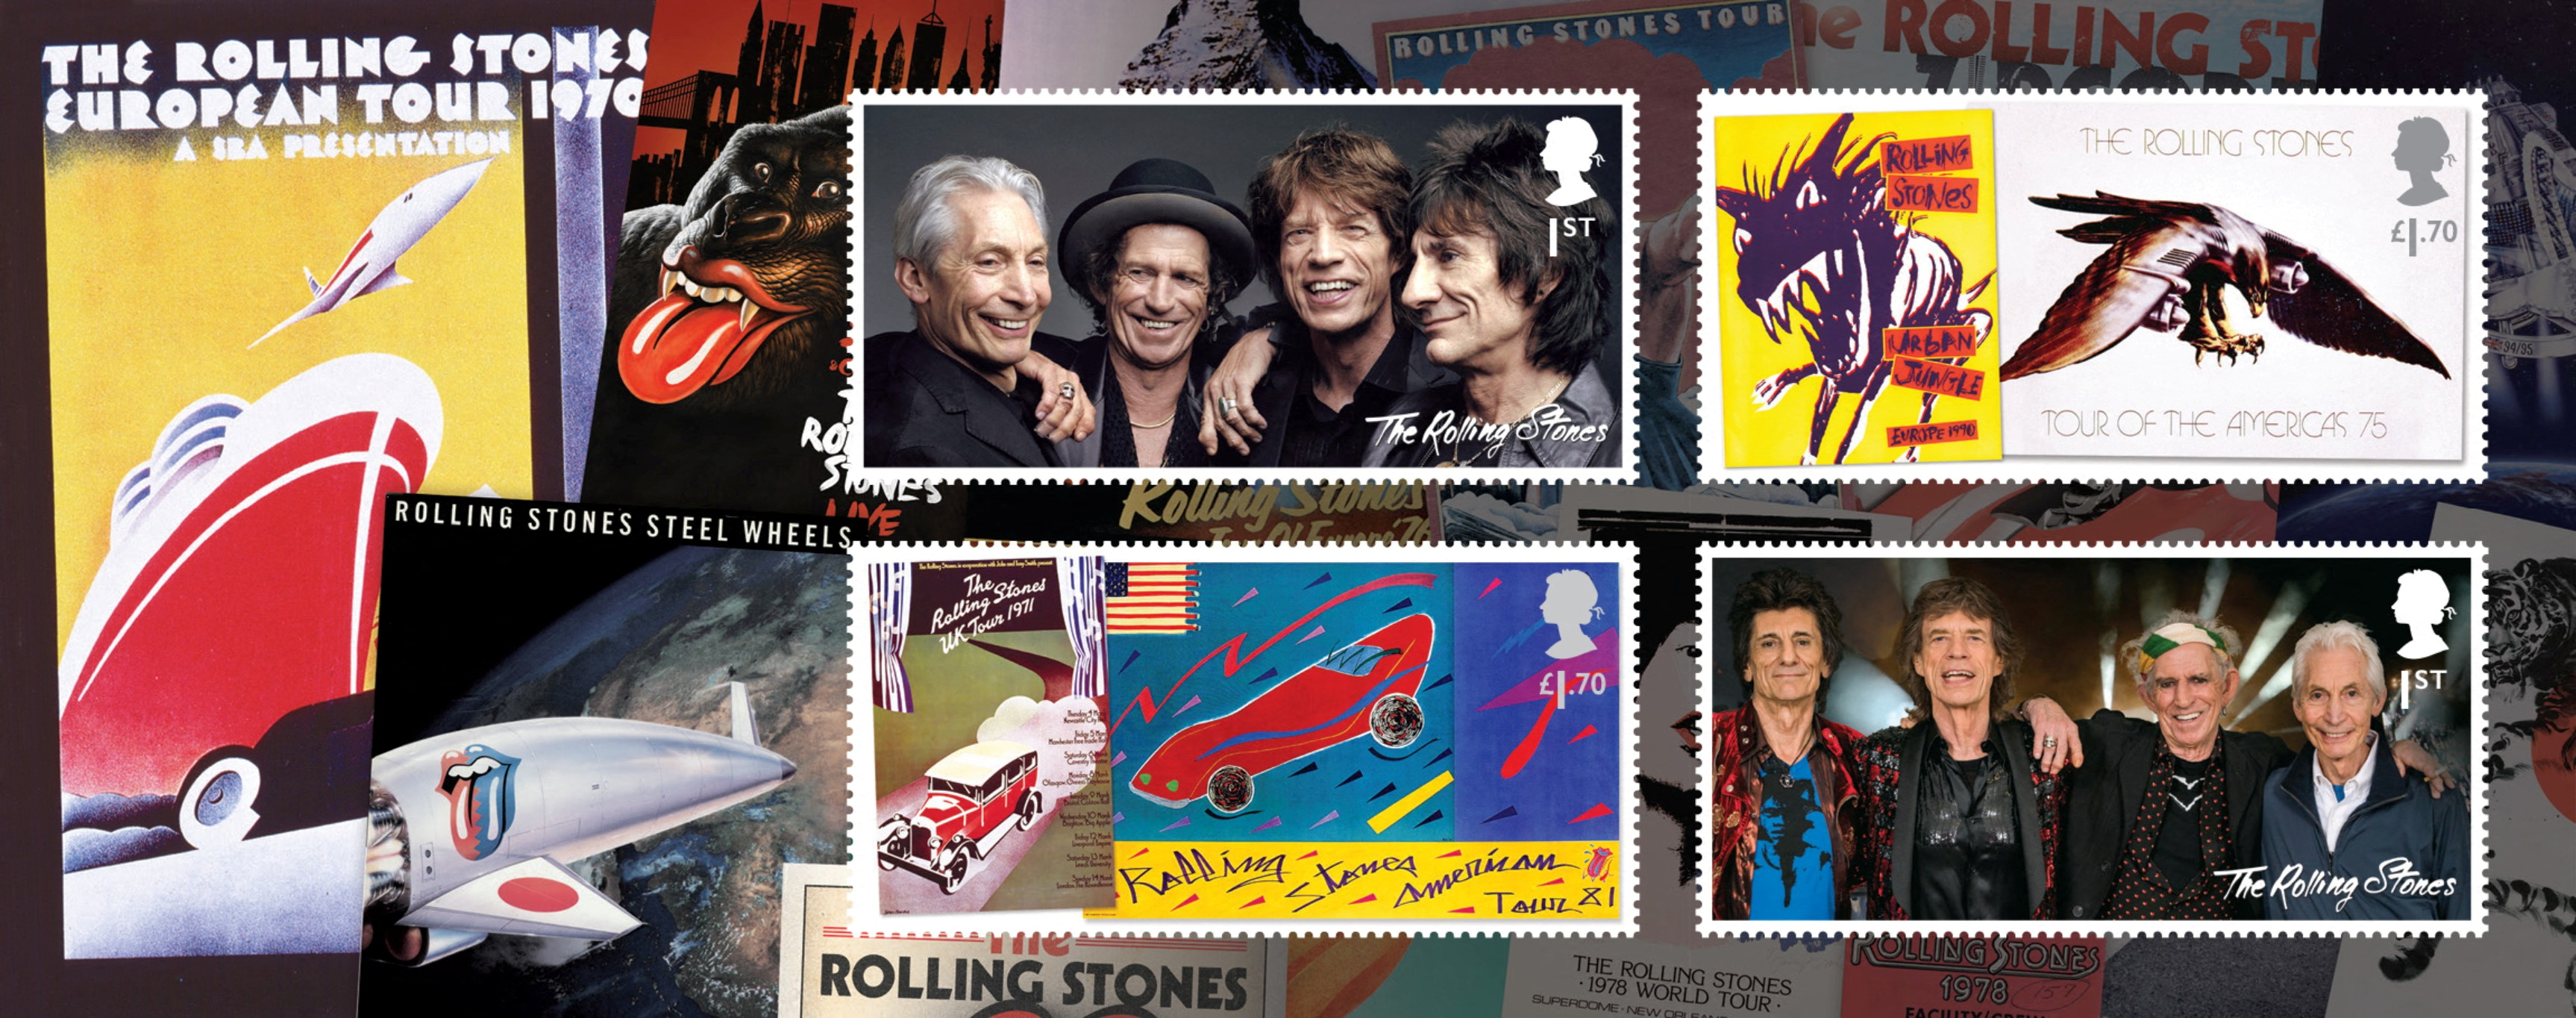 A set of four Royal Mail stamps honouring 60 years of the legendary rock group The Rolling Stones are presented in a Miniature Sheet in this undated handout image. Royal Mail/Handout via REUTERS 